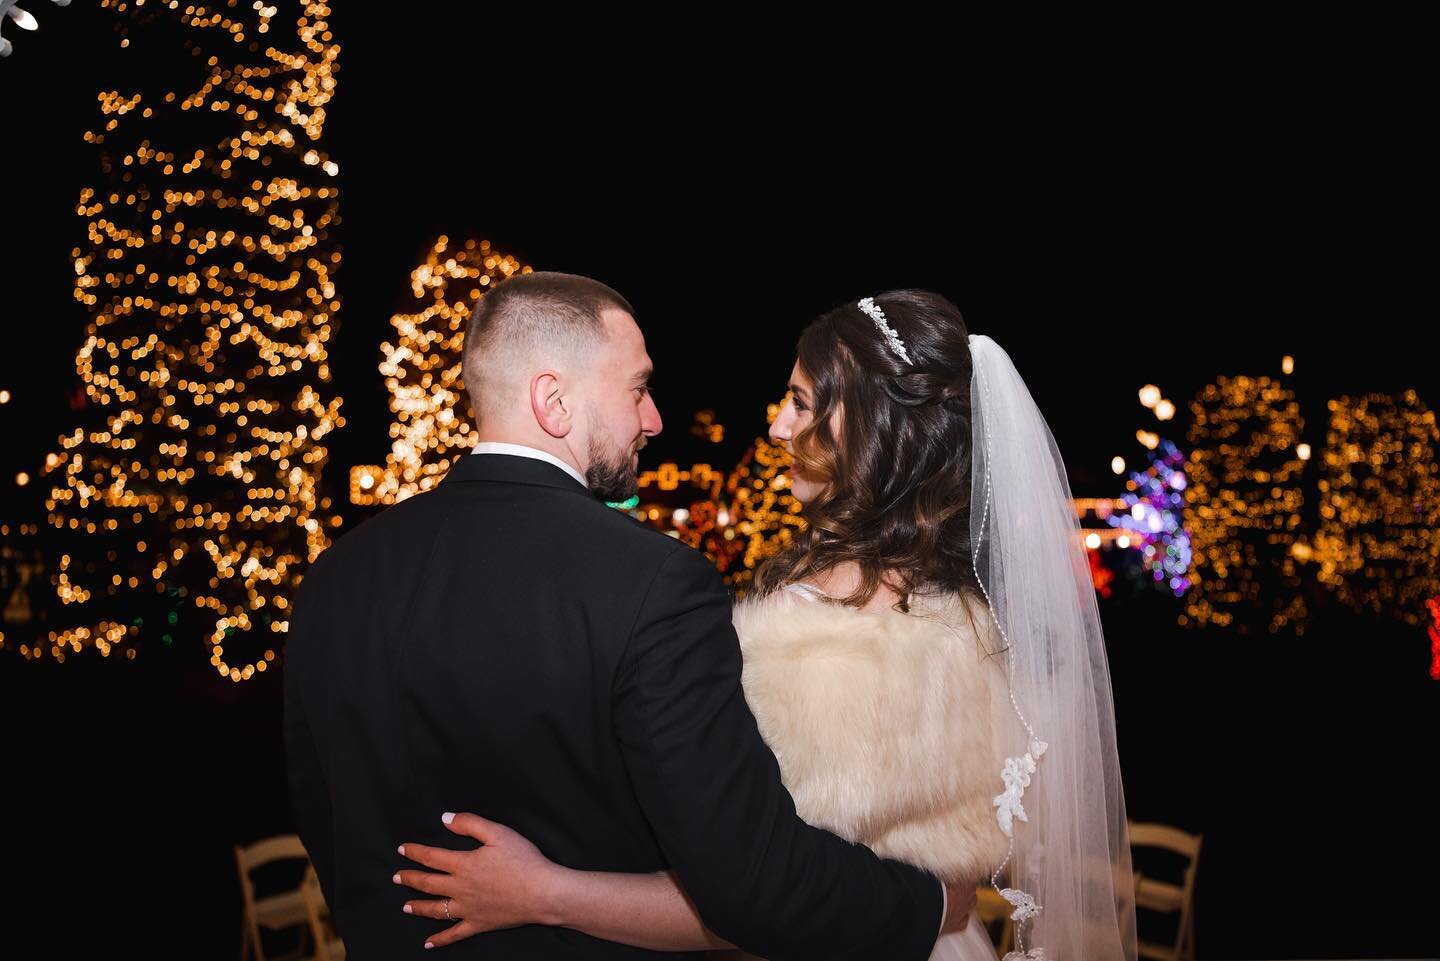 a magical wedding! The lights were bright and love was in the air🎄 congrats to these two!&hearts;️